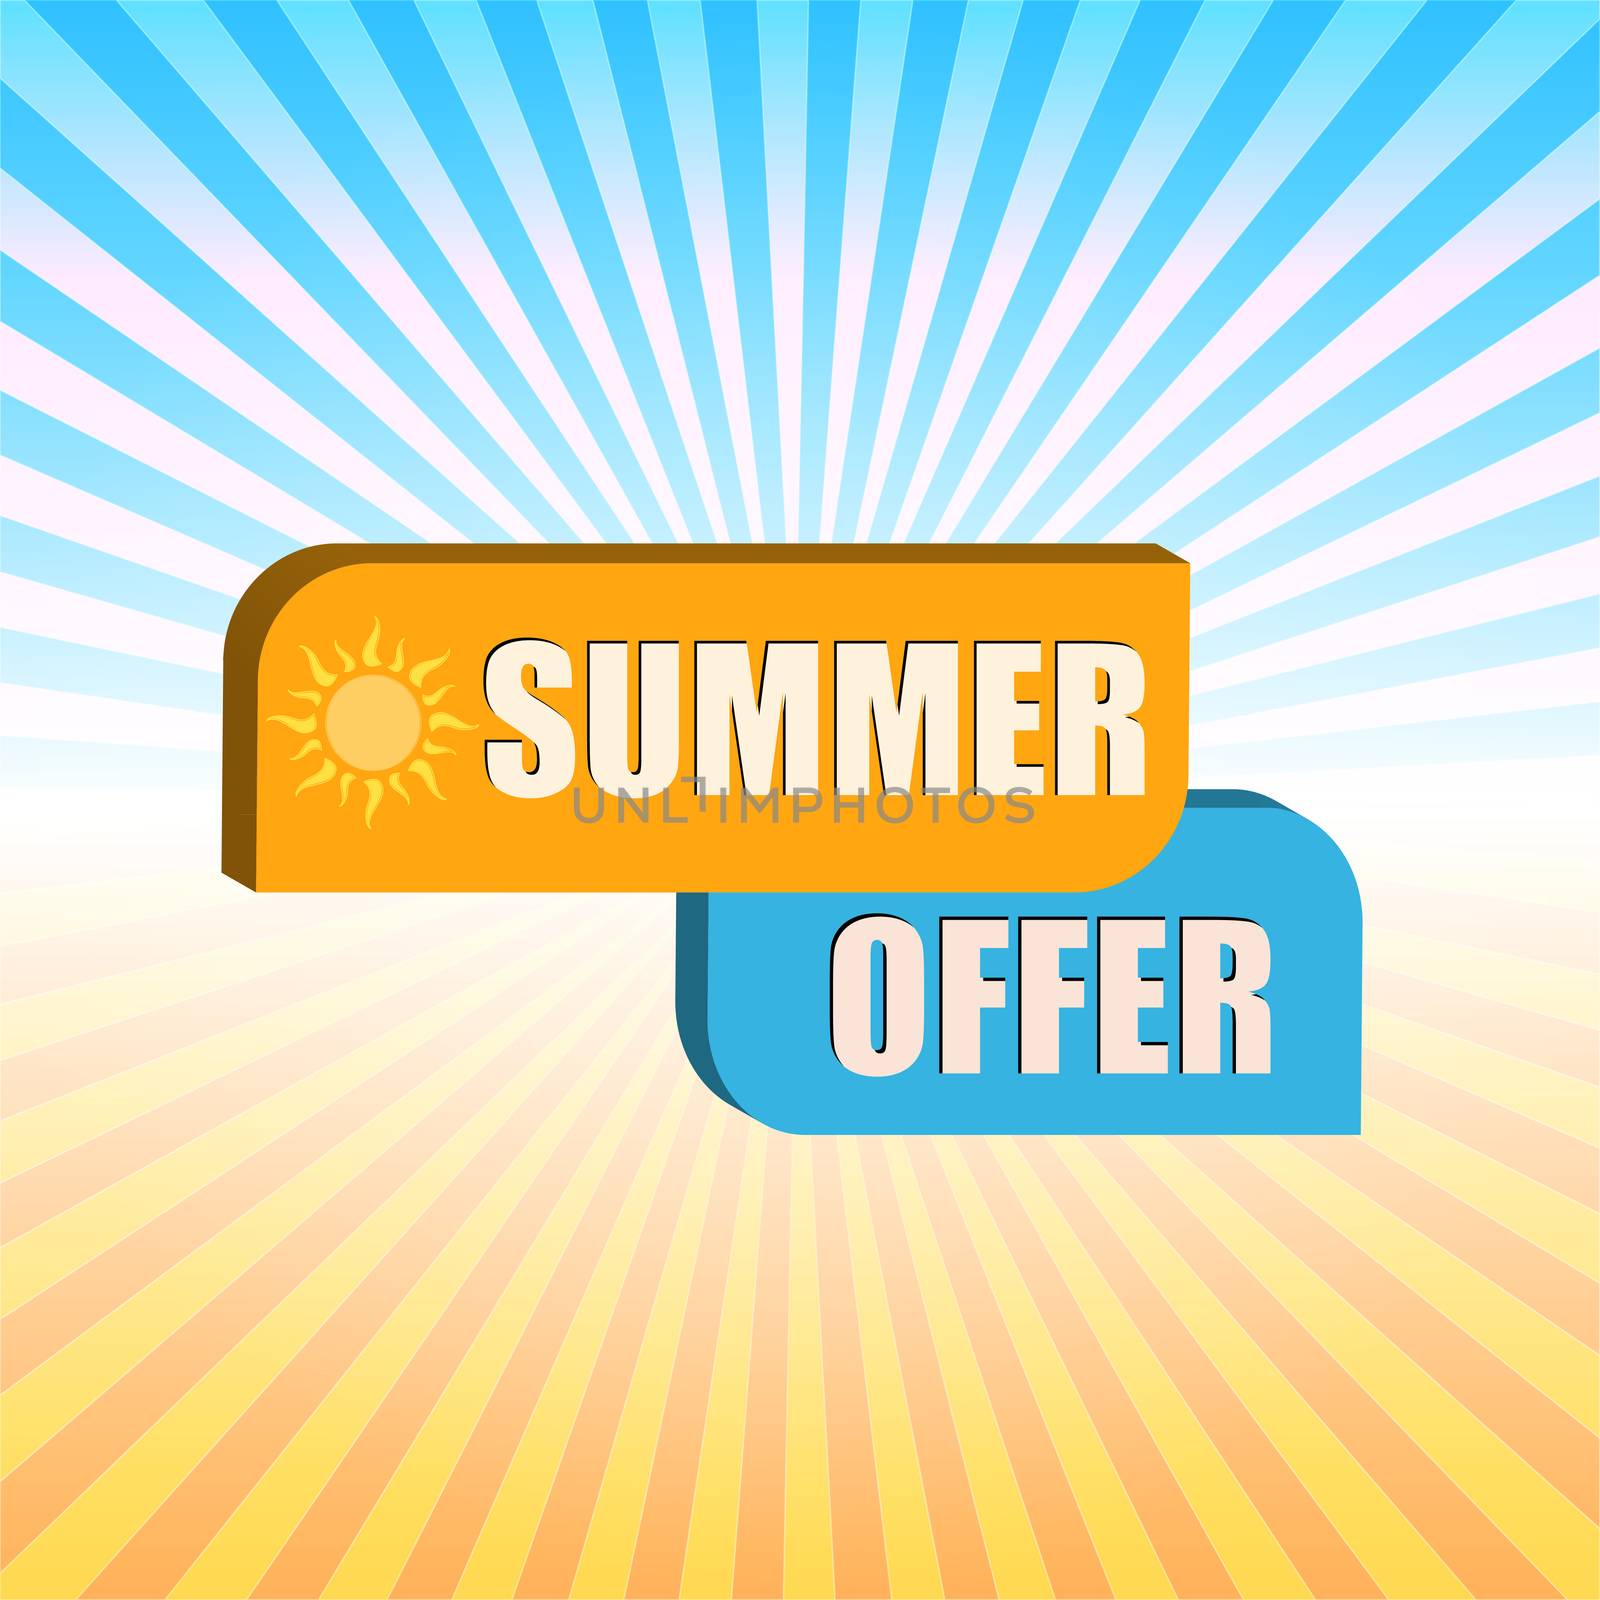 summer offer - orange and blue box over gradient rays, business label